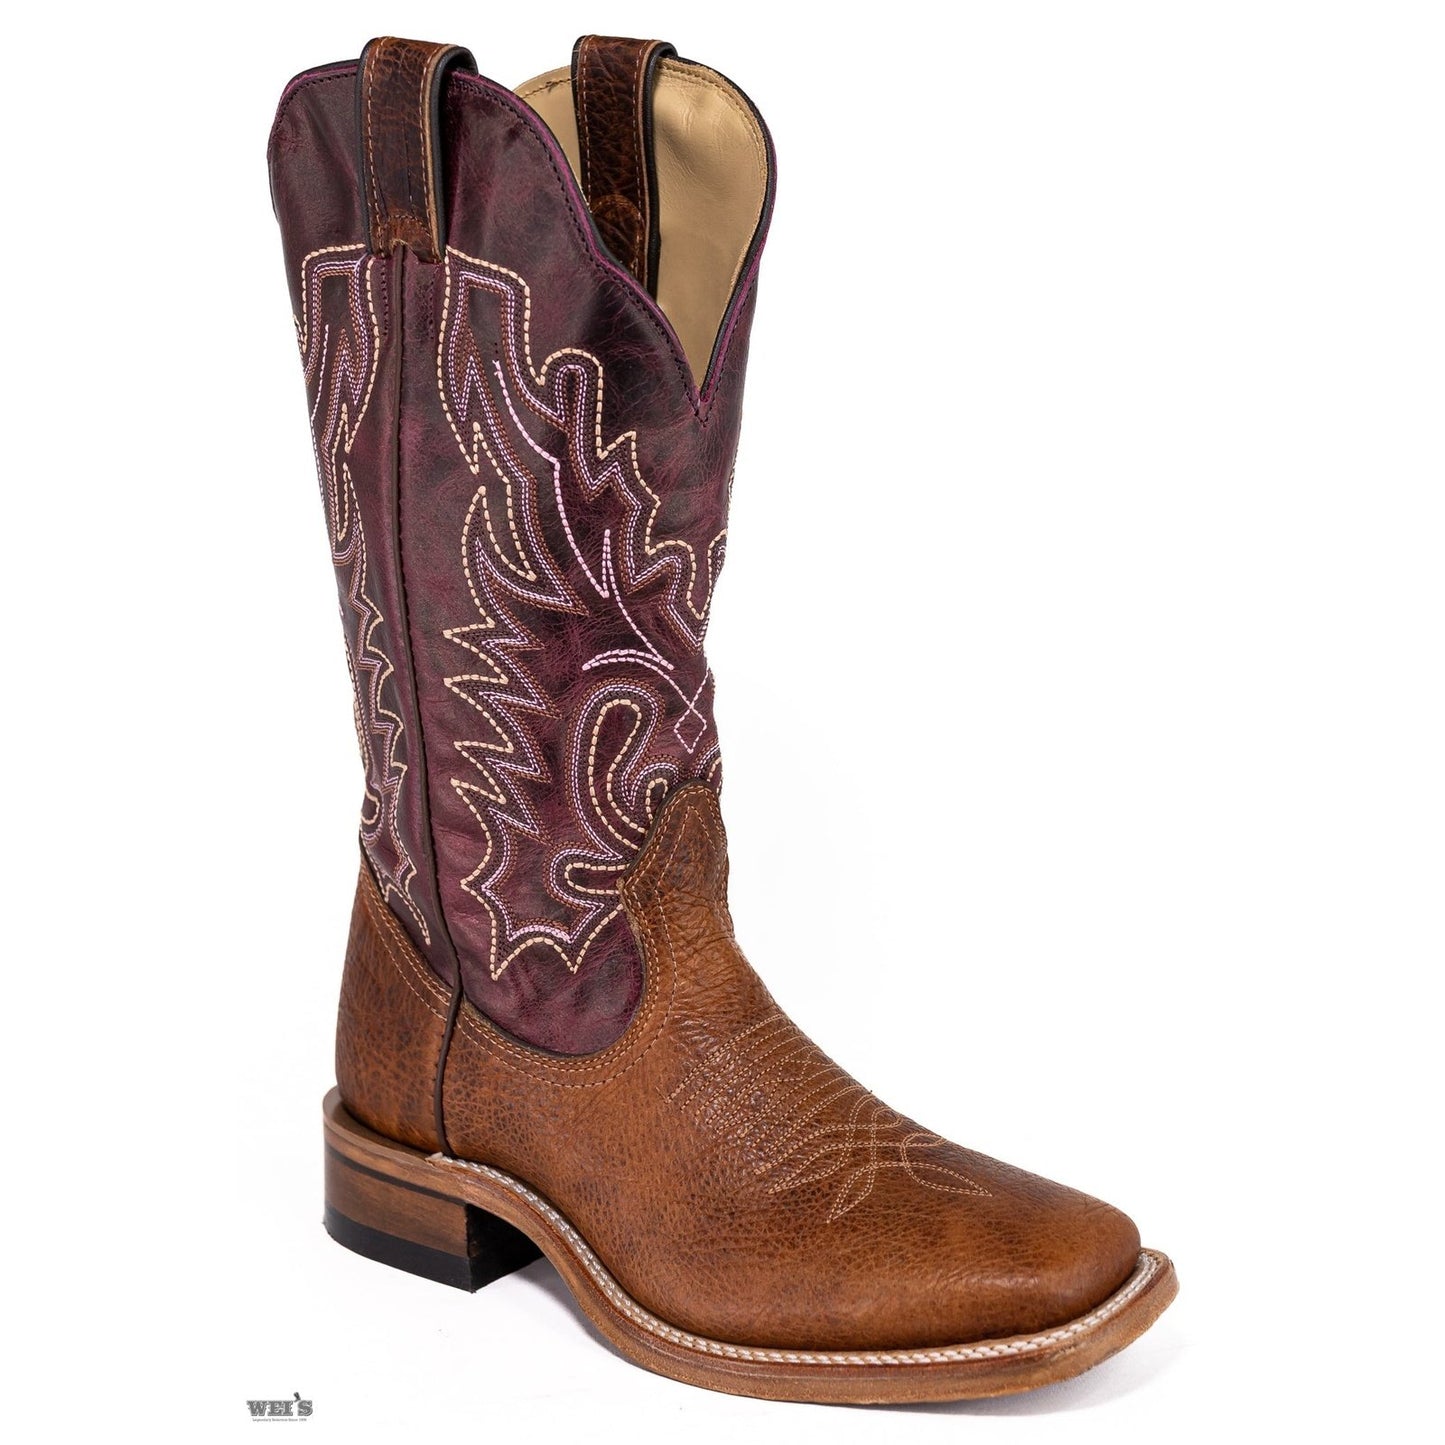 Boulet Women’s Cowgirl Boots 13" Magenta Shaft Wide Square Toe 6251 - Boulet